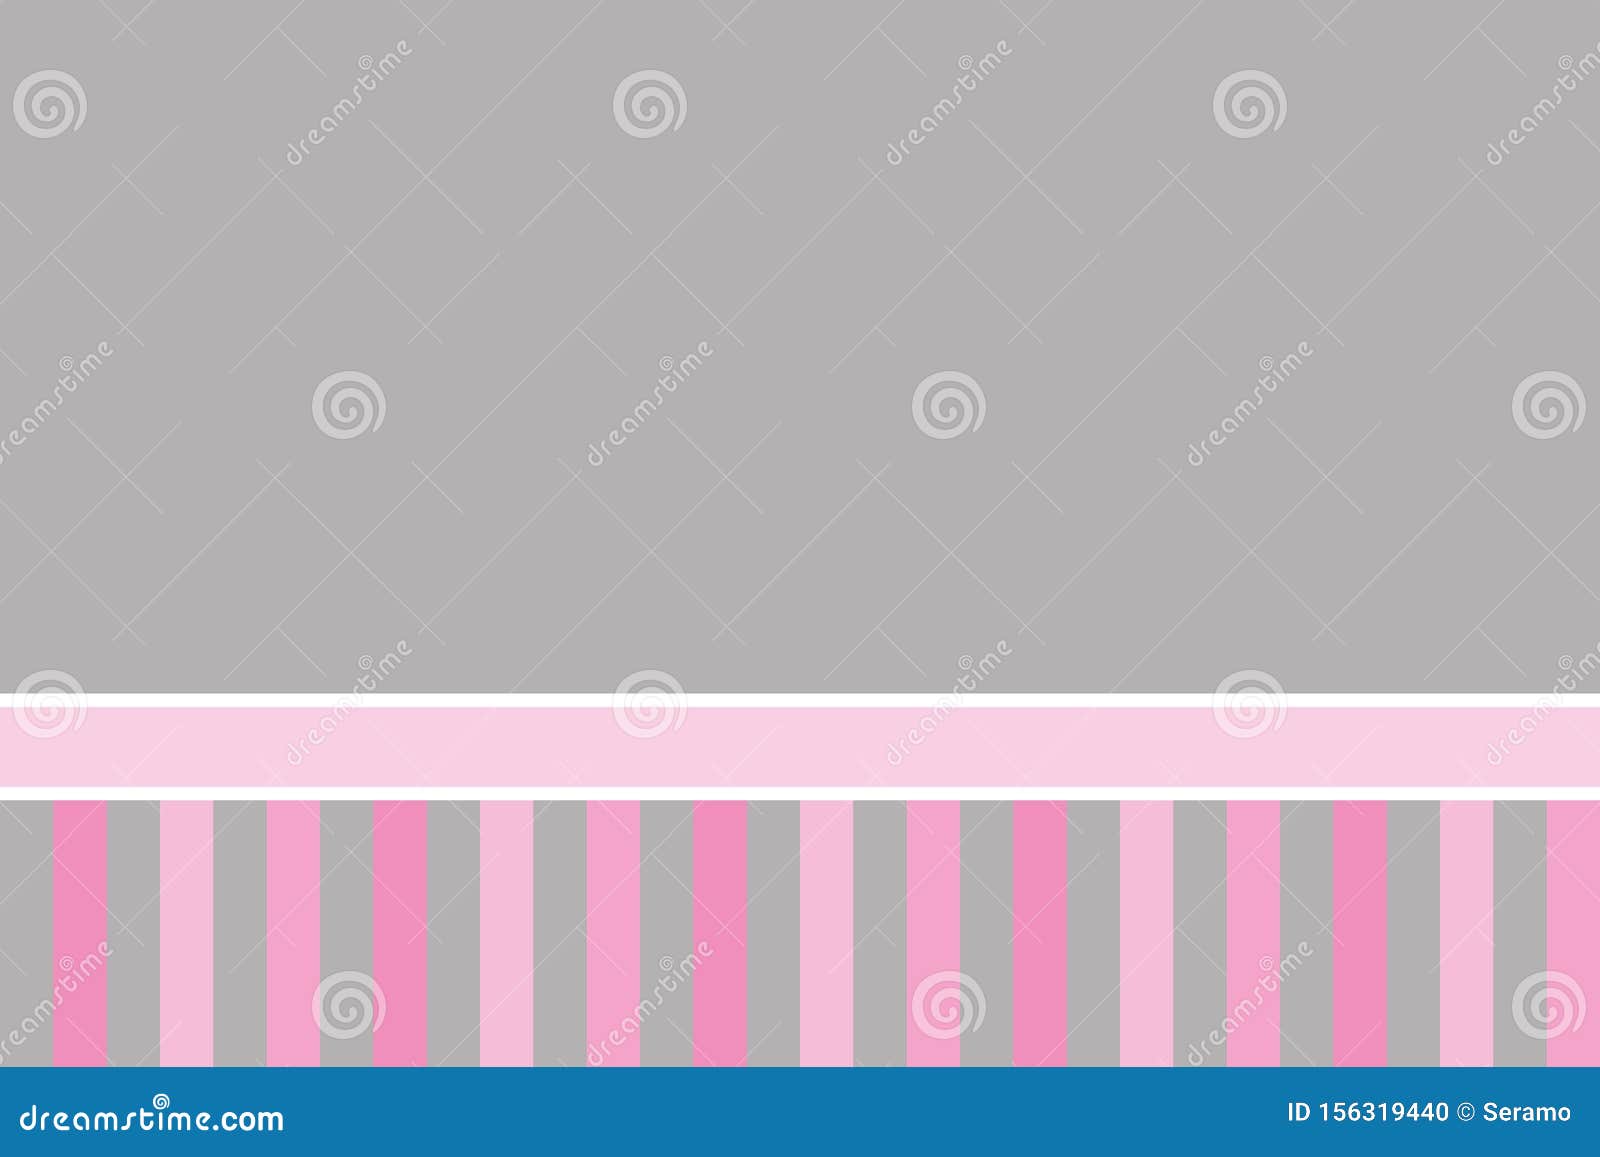 Grey Background with Striped Fringe Stock Vector - Illustration of ...